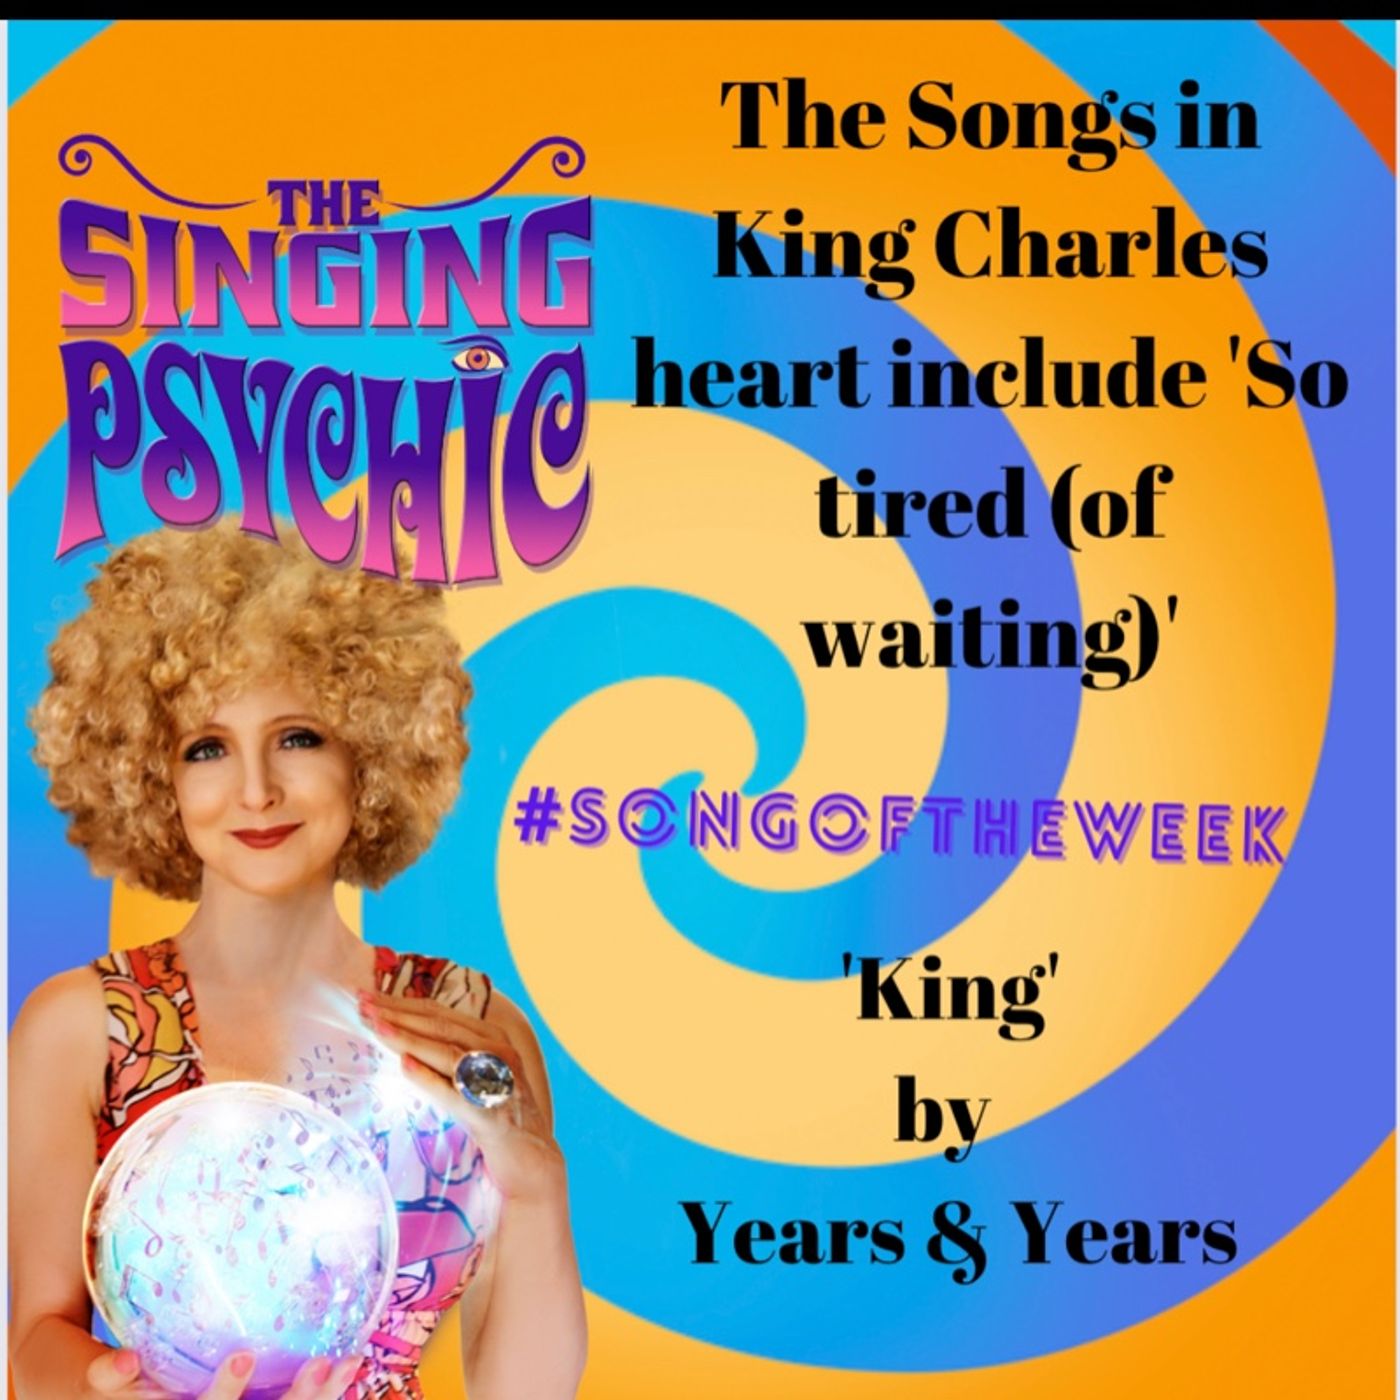 King Charles songs when he was born & song of the week for us all is King by Years & Years